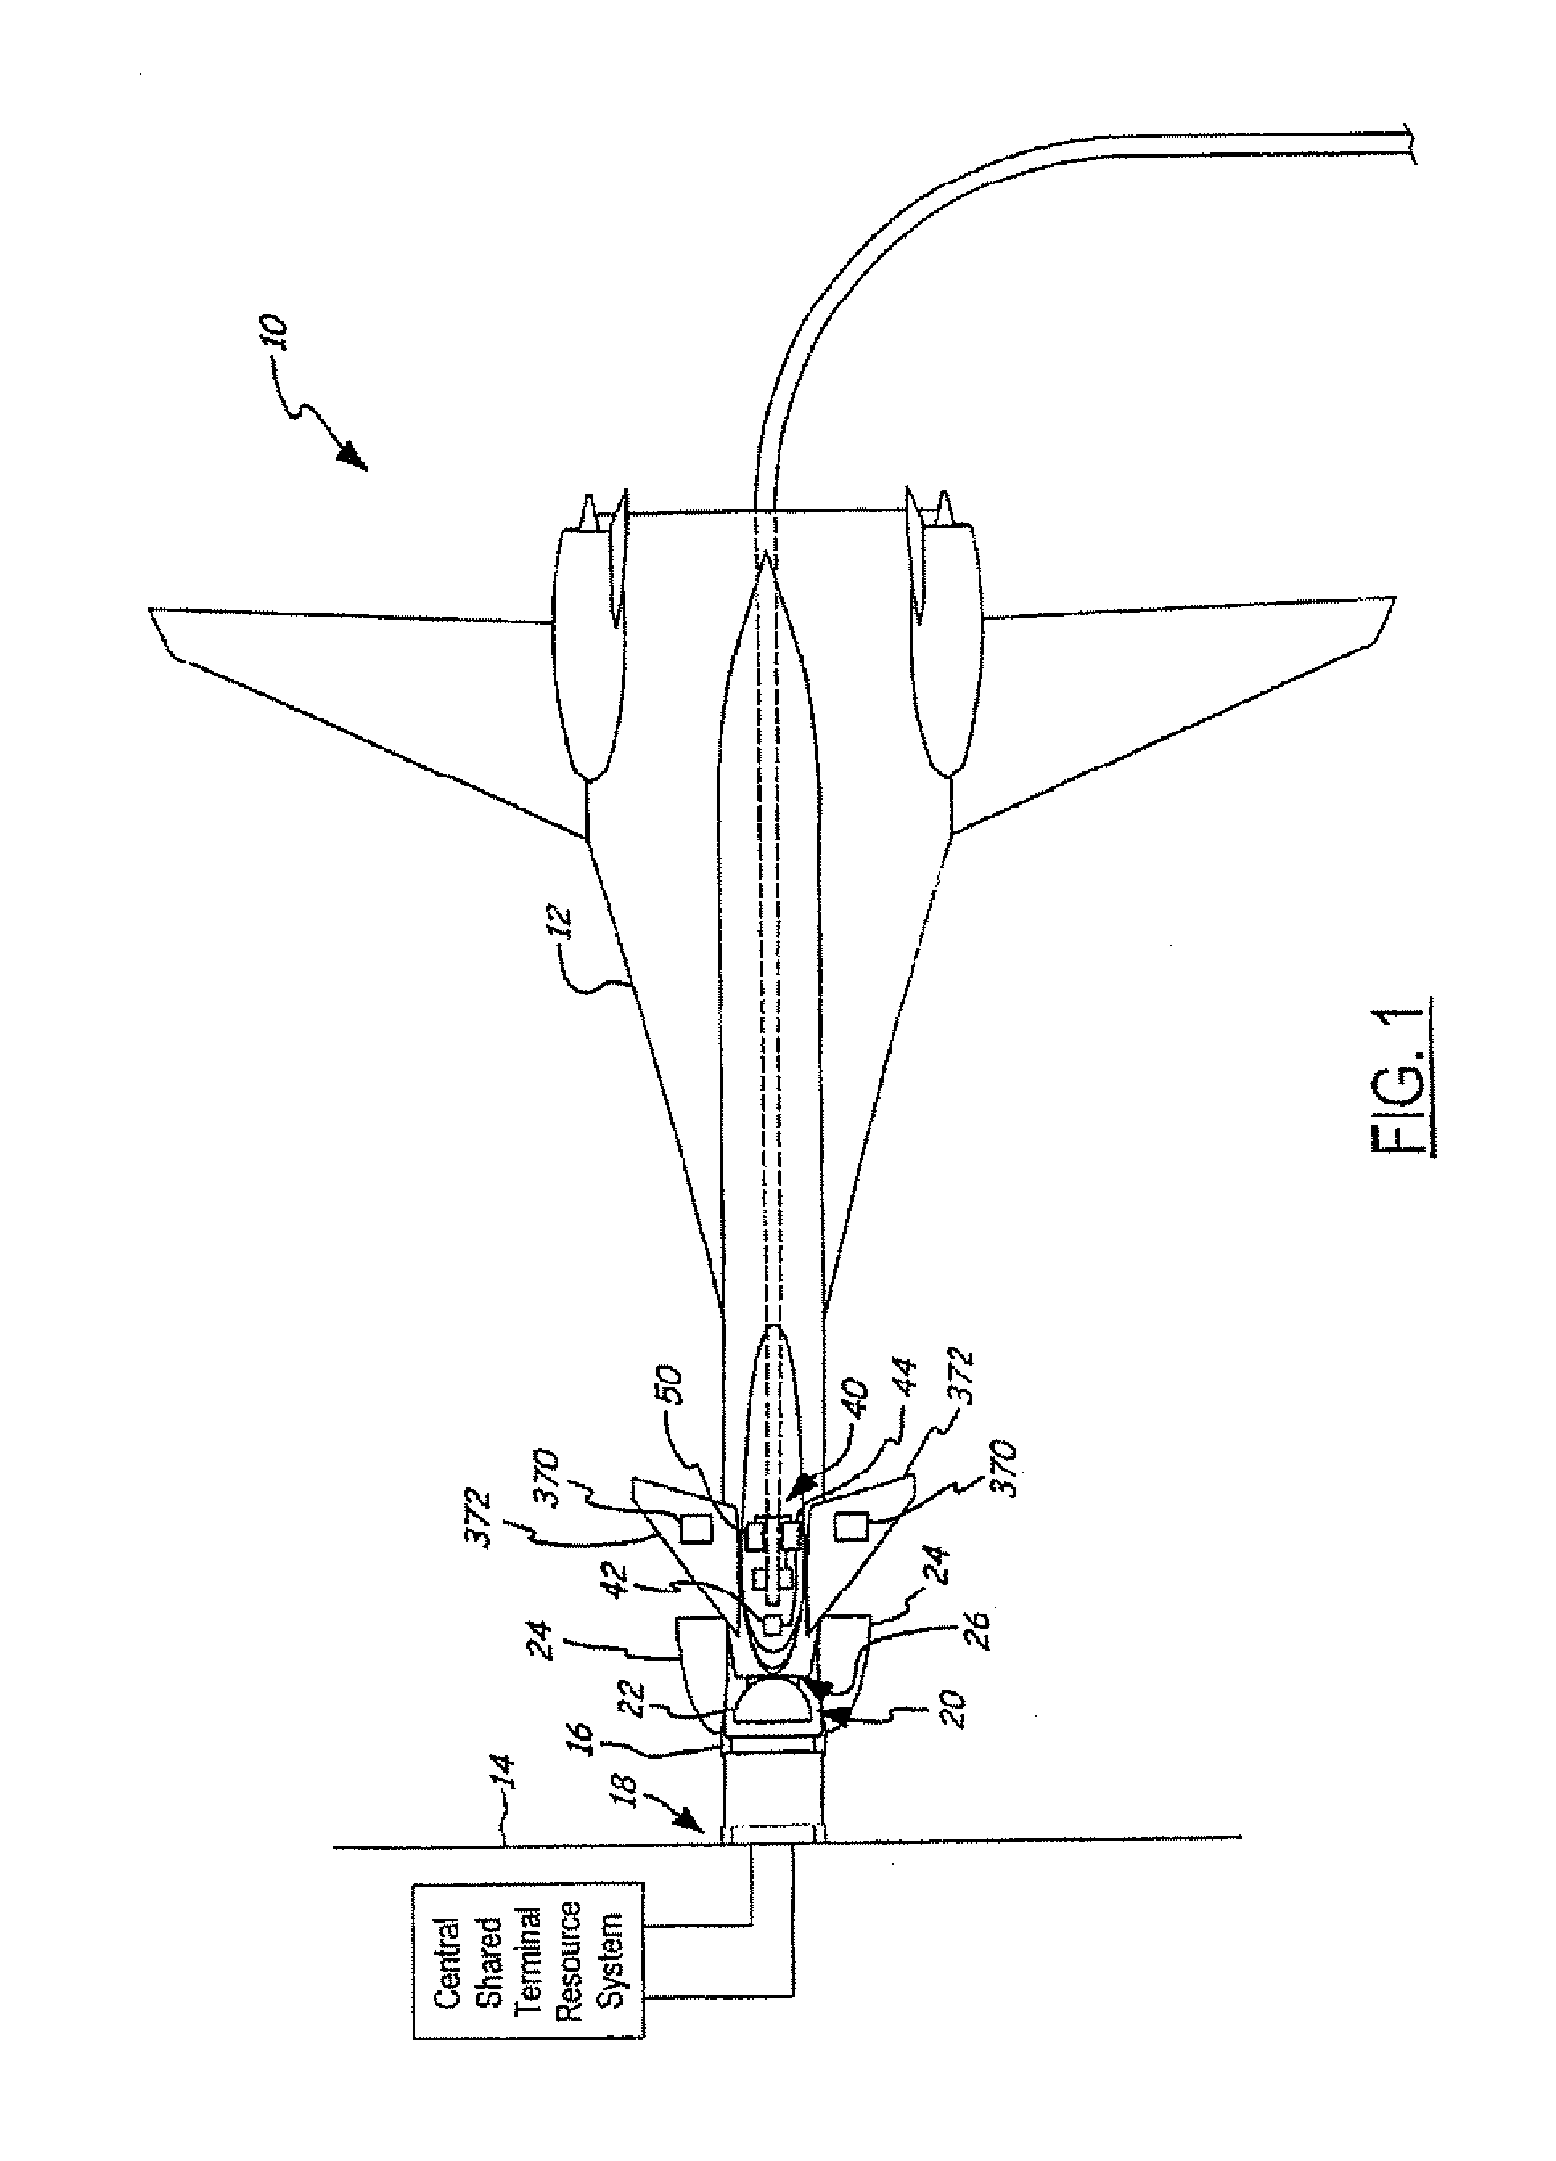 Operational ground support system having automated fueling